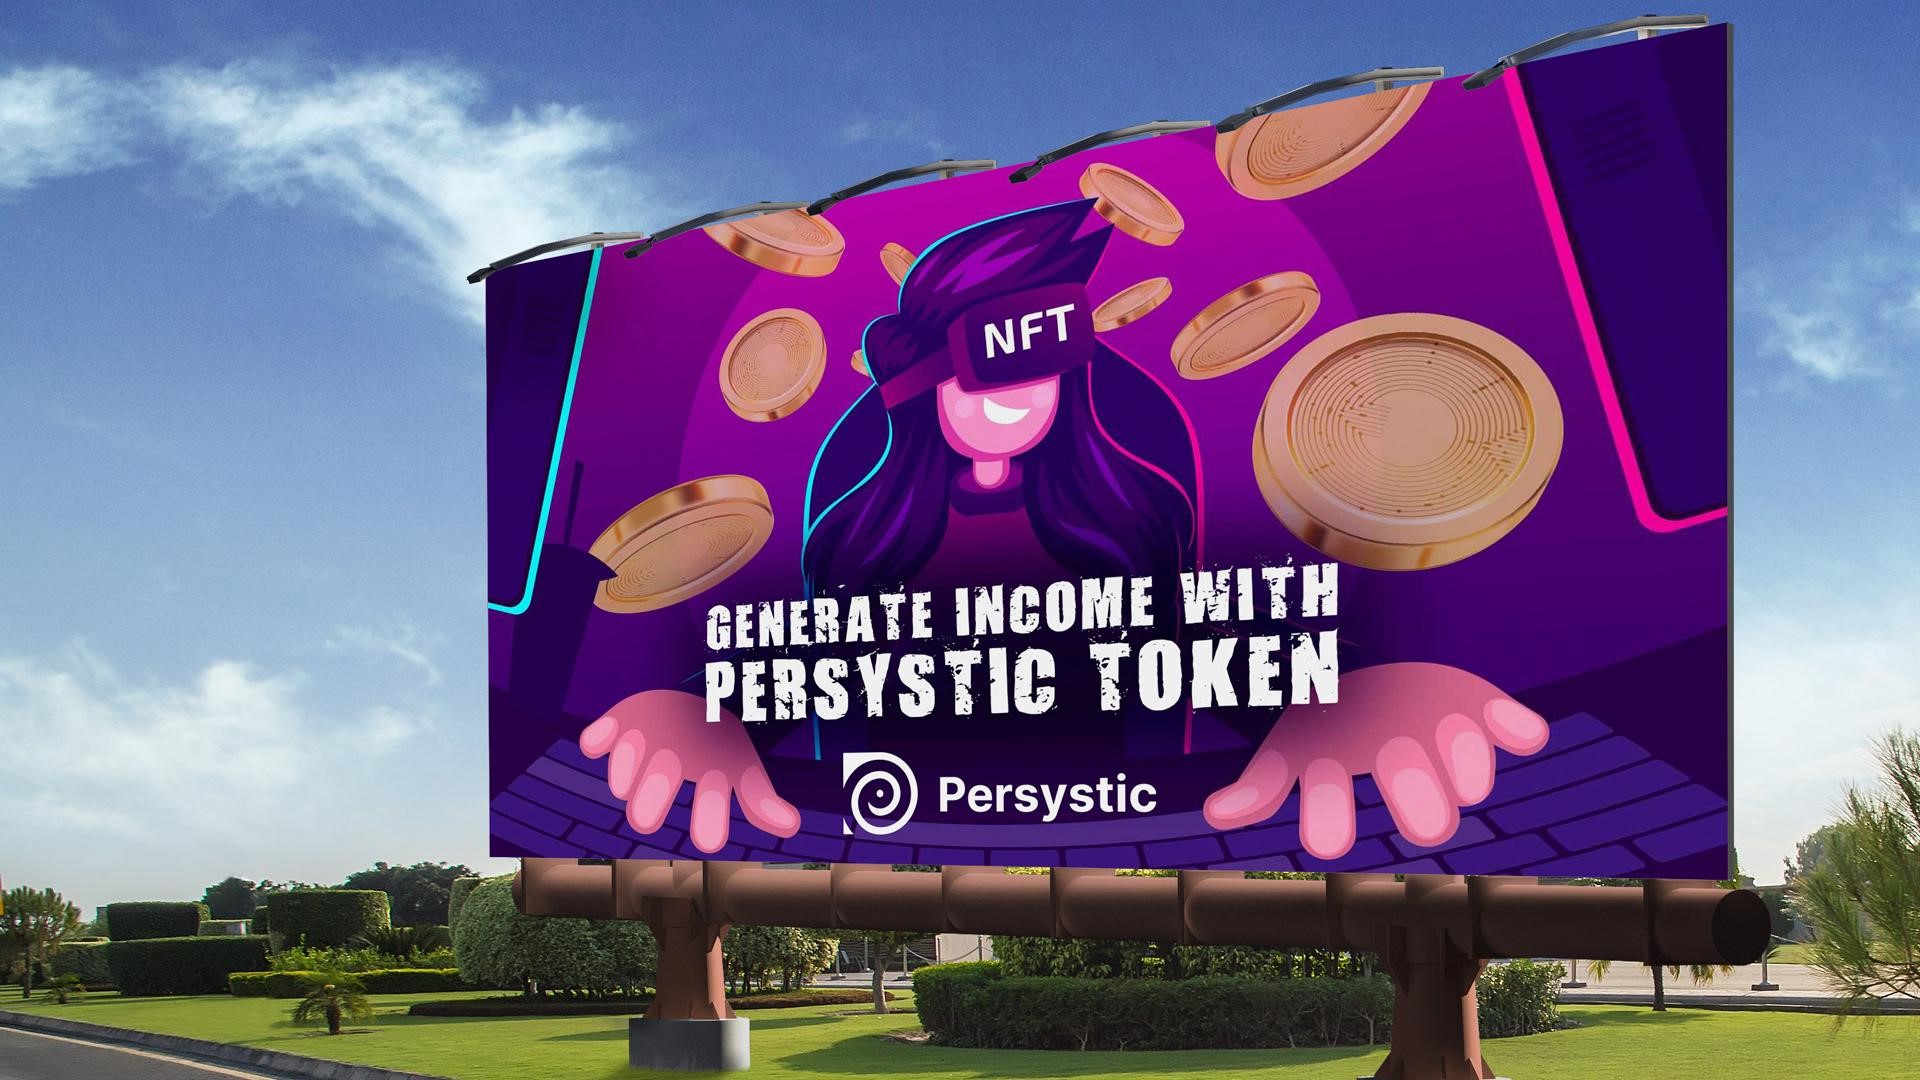 Can Persystic (PSYS) Compete With Crypto Giants Like Polygon (MATIC) and Cosmos (ATOM)?